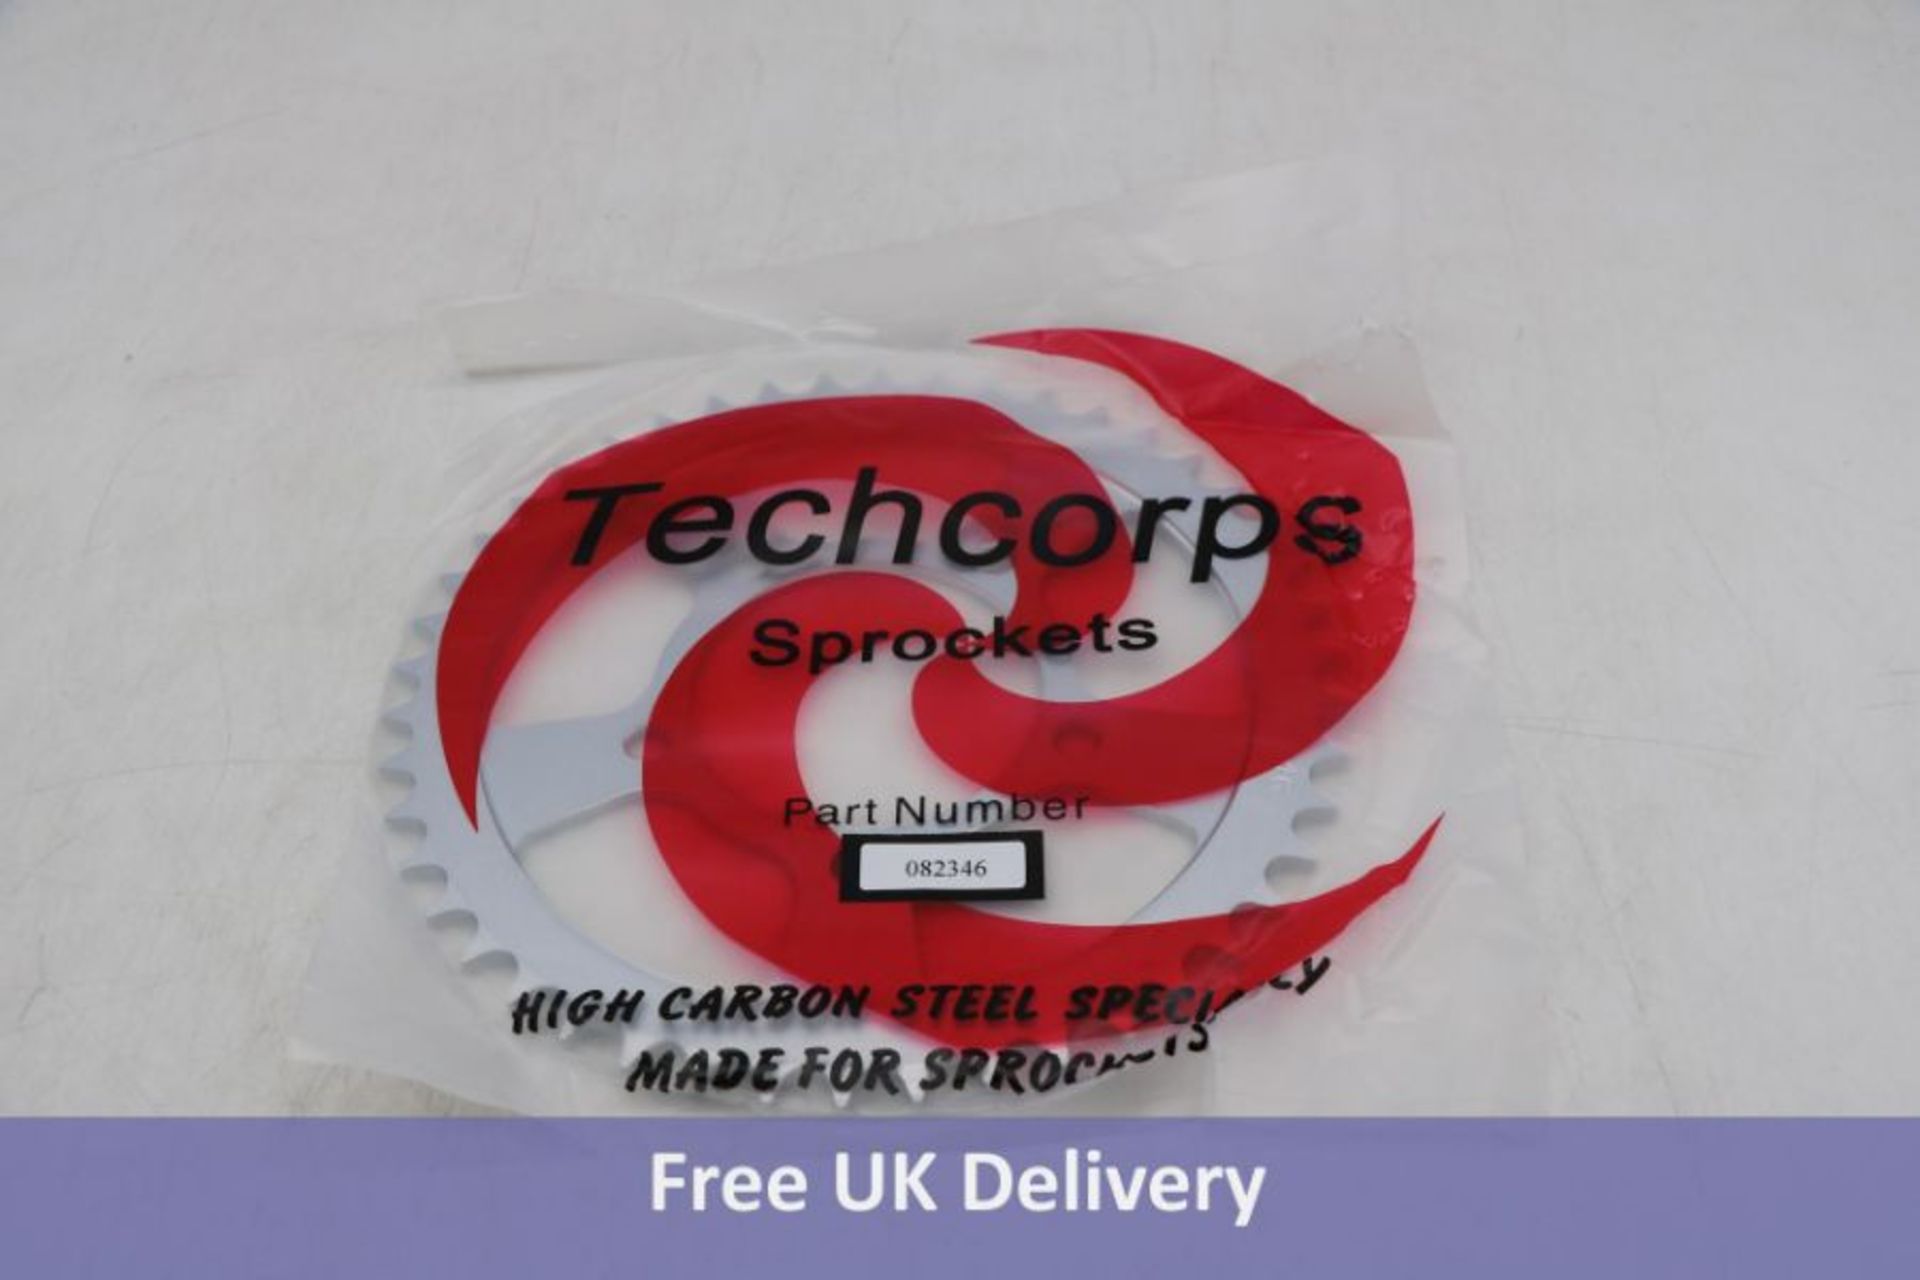 Four Techcorps Sprockets to include 2x 081947 and 2x 082346